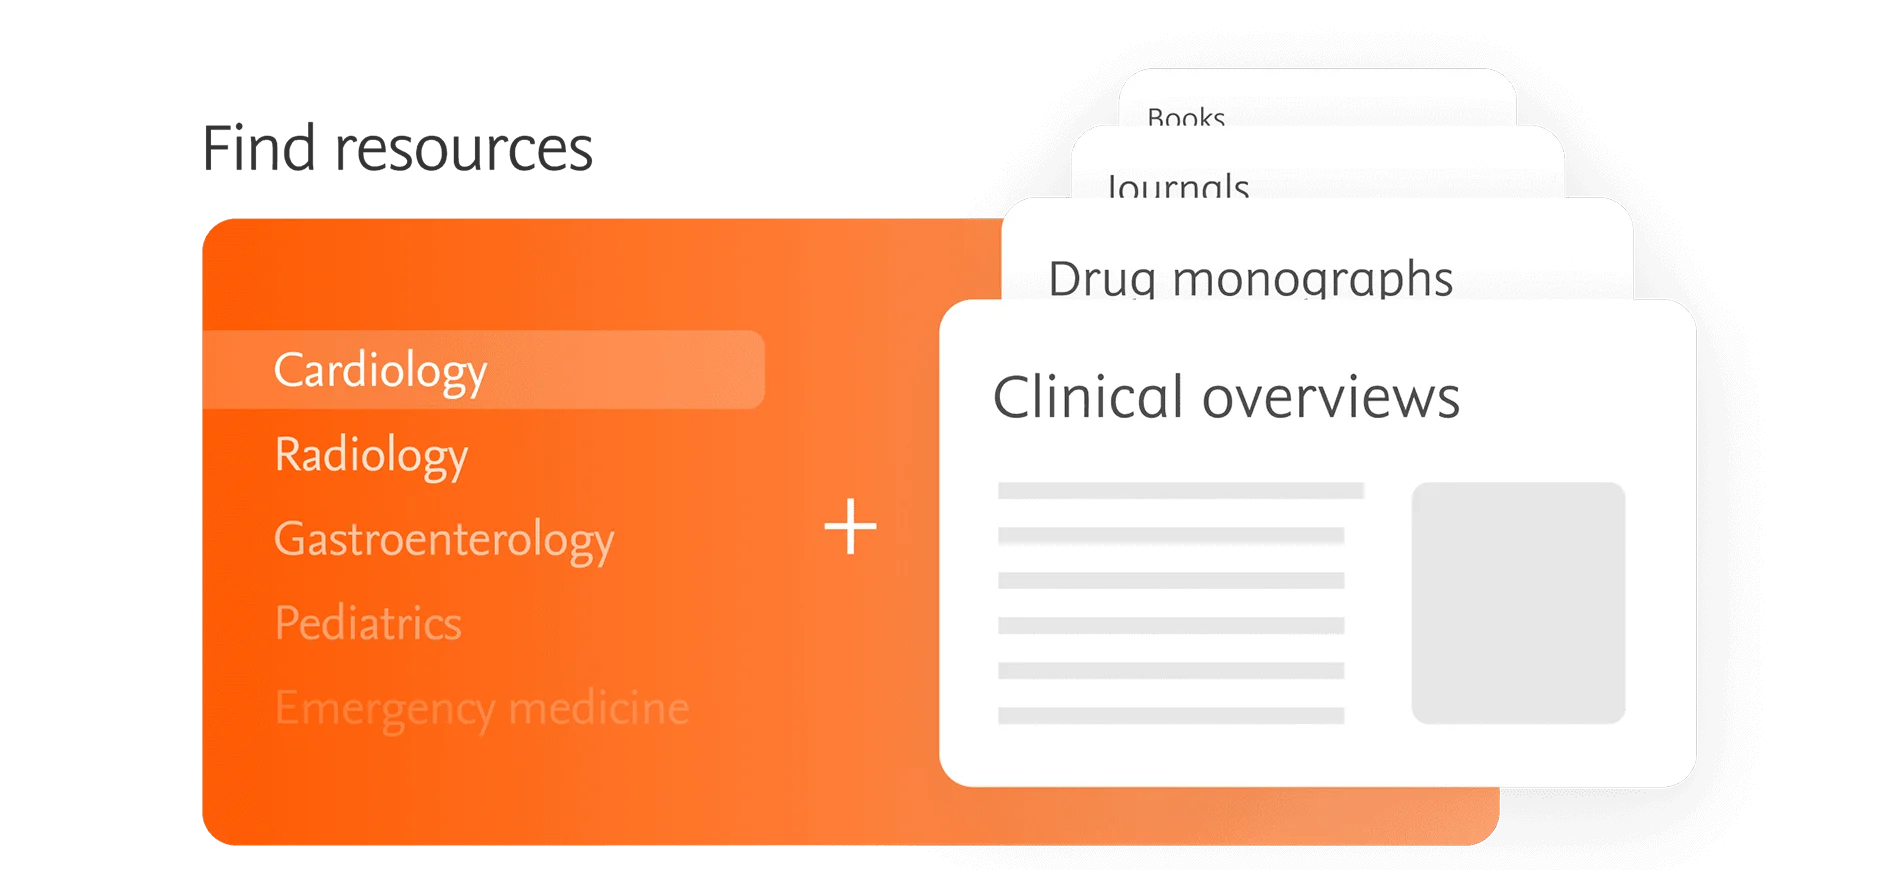 Find Resources Clinical Overviews Drug Monograph Benefit